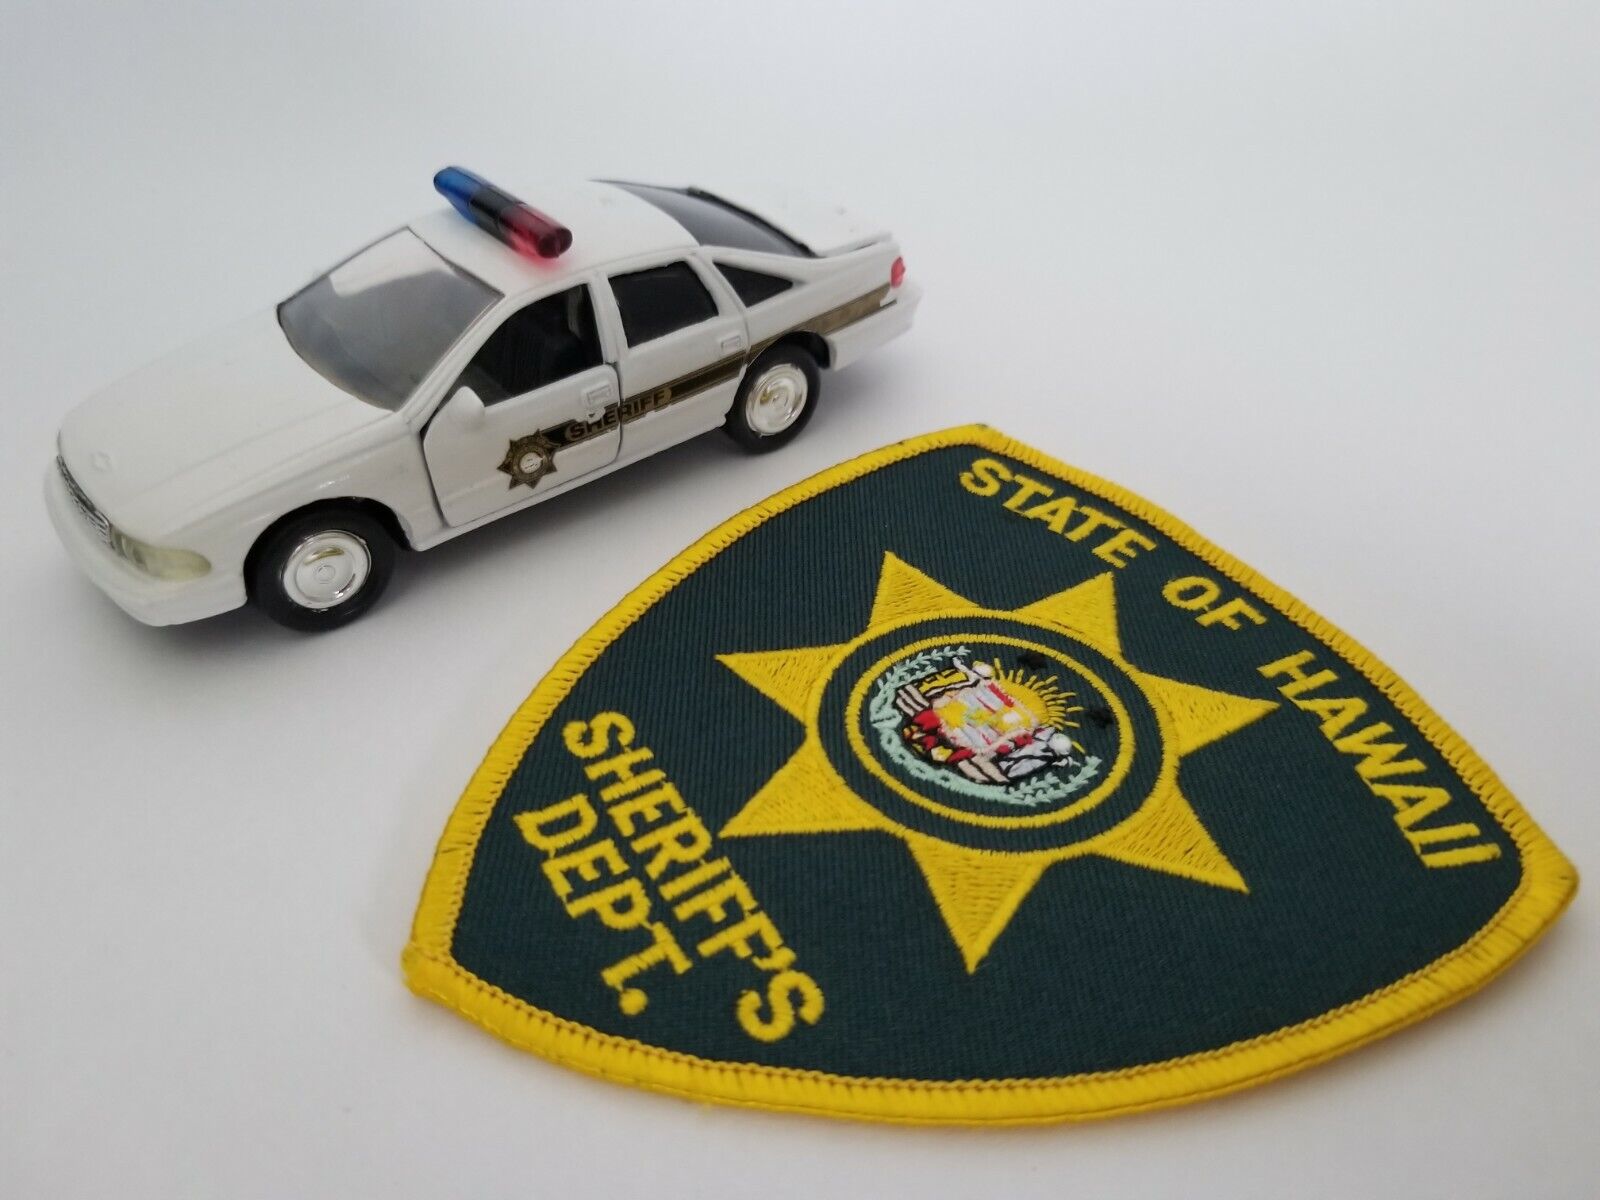 Roadchamps 1:43 Diecast Police Cruiser and Agency Police Patch (Hawaii Sheriff)